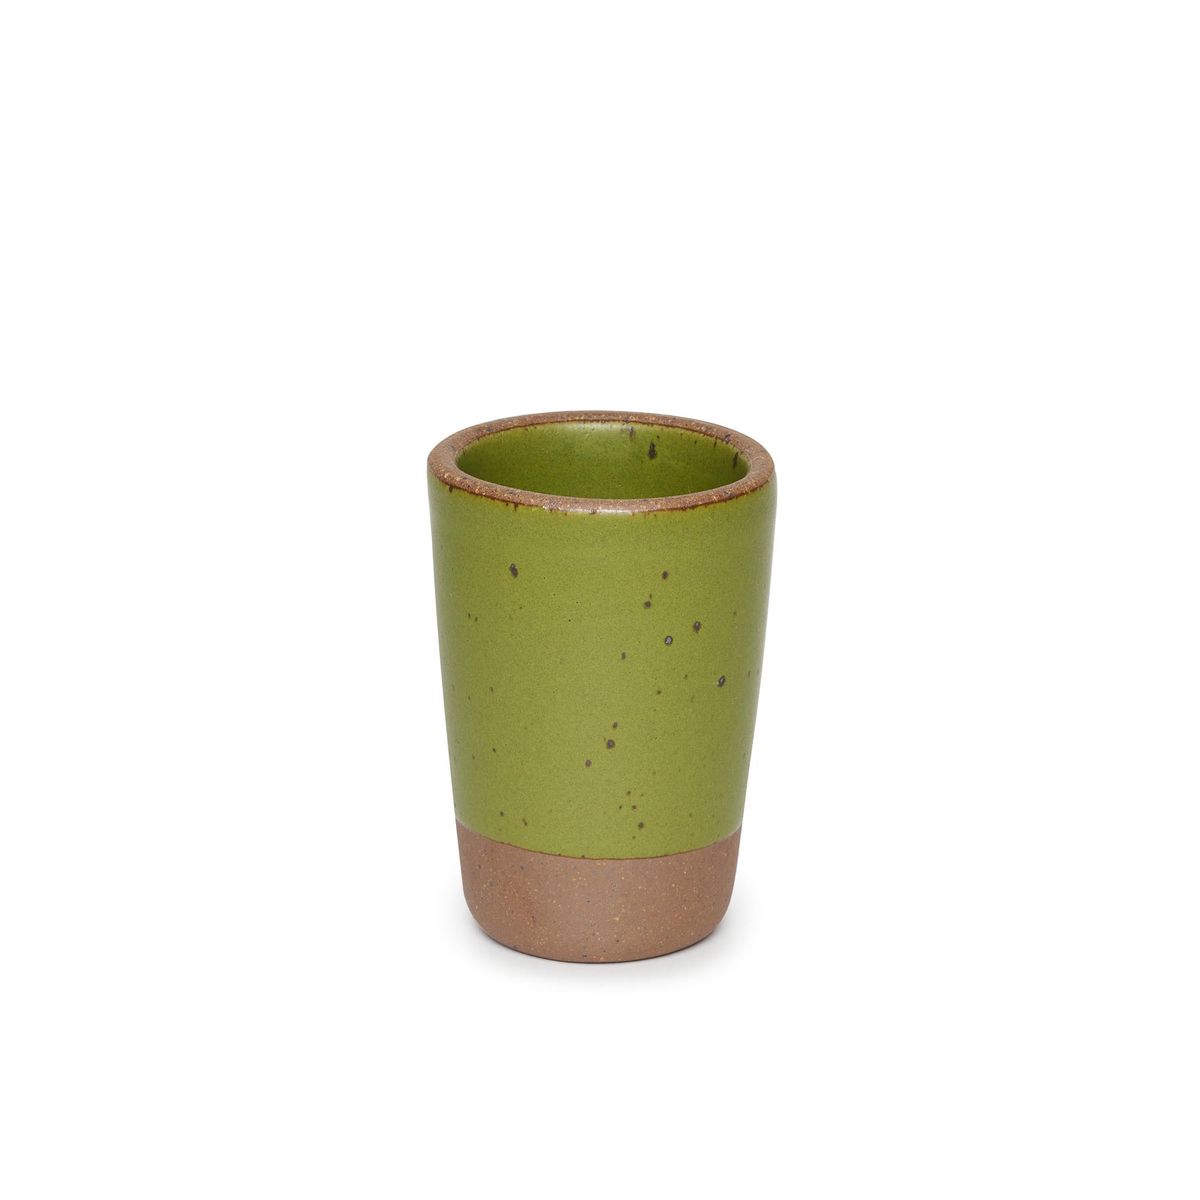 Juice Cup in Fiddlehead, a mossy, olive green.